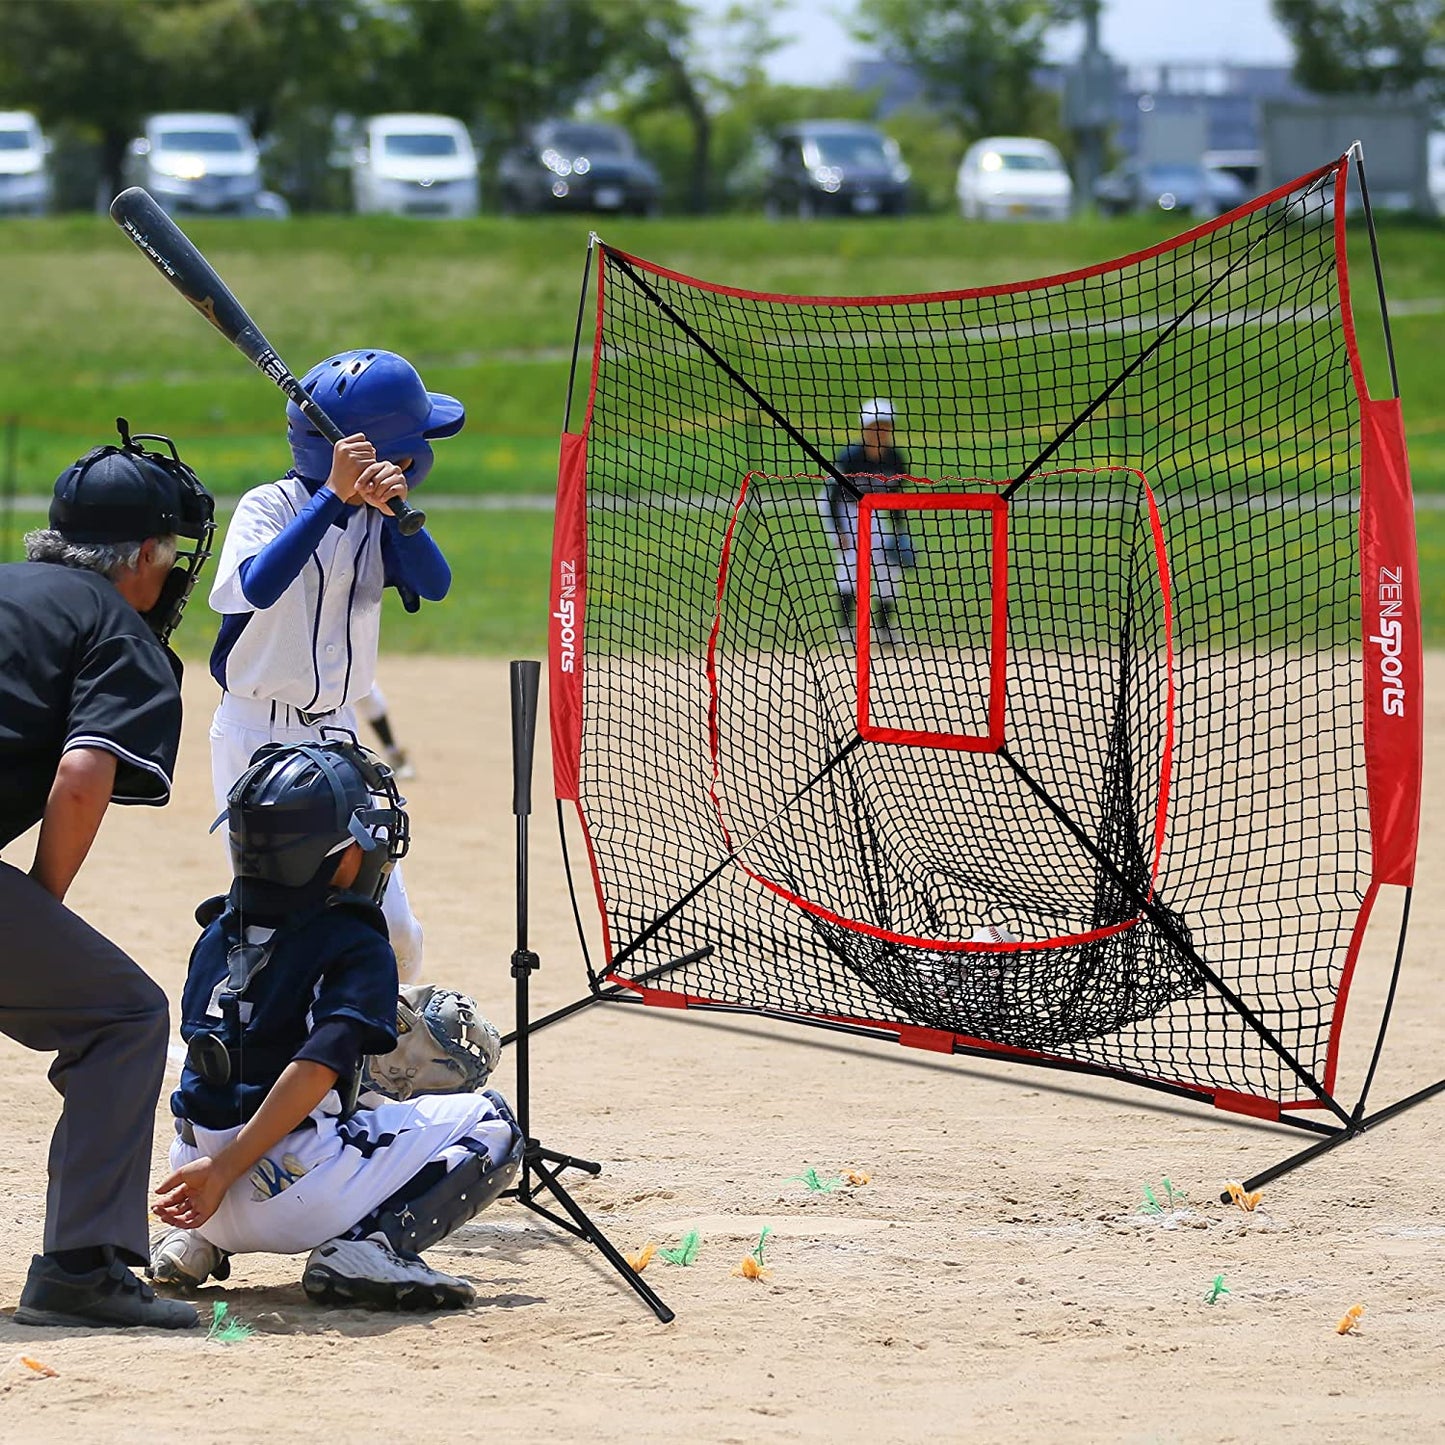 Baseball Softball Practice Hitting Net with Batting Tee Pratice Pitching Batting Fielding with Strike Zone Target and Carrying Bag